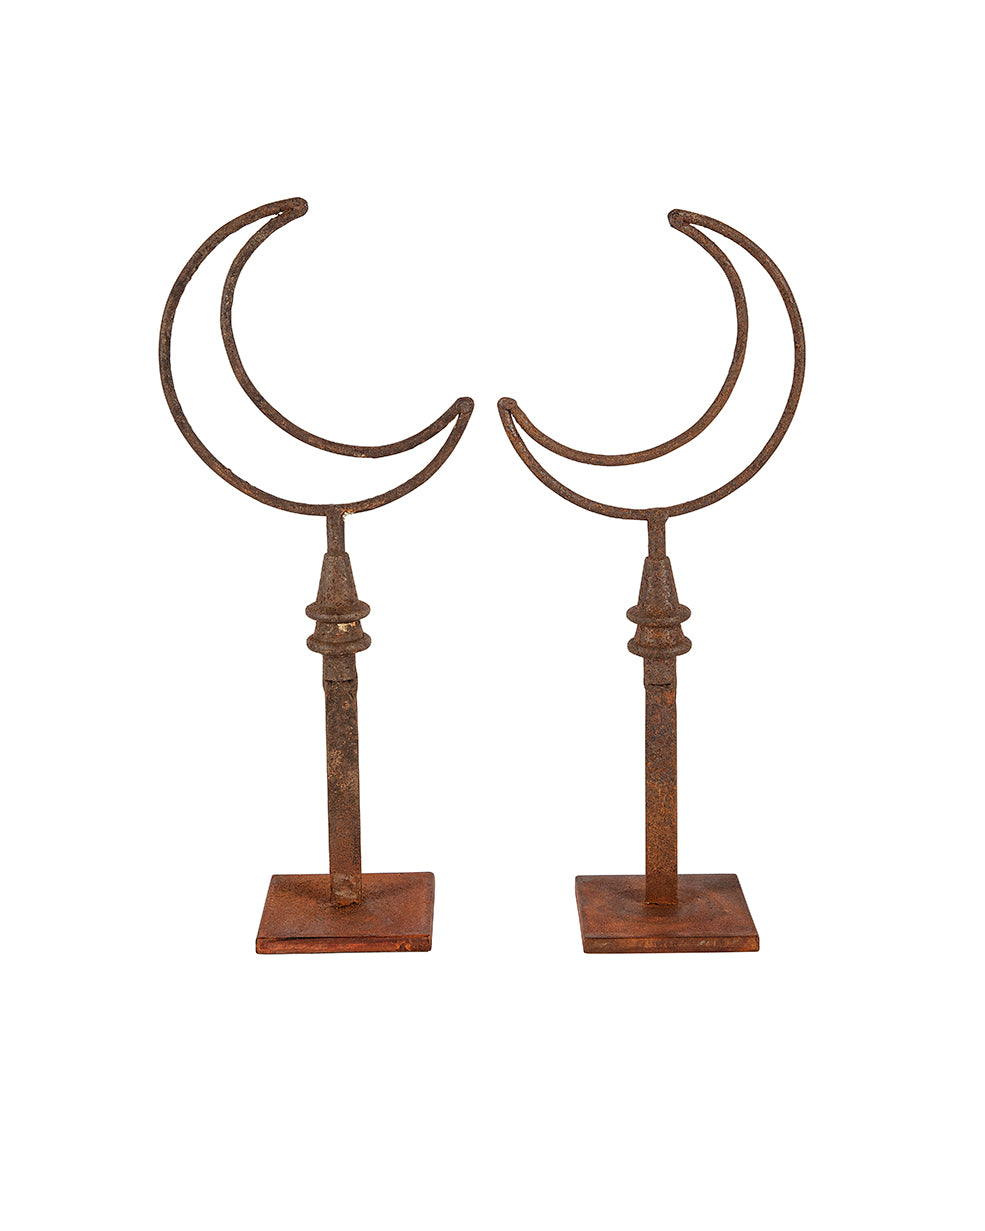 Pair of moon-shaped iron sculptures